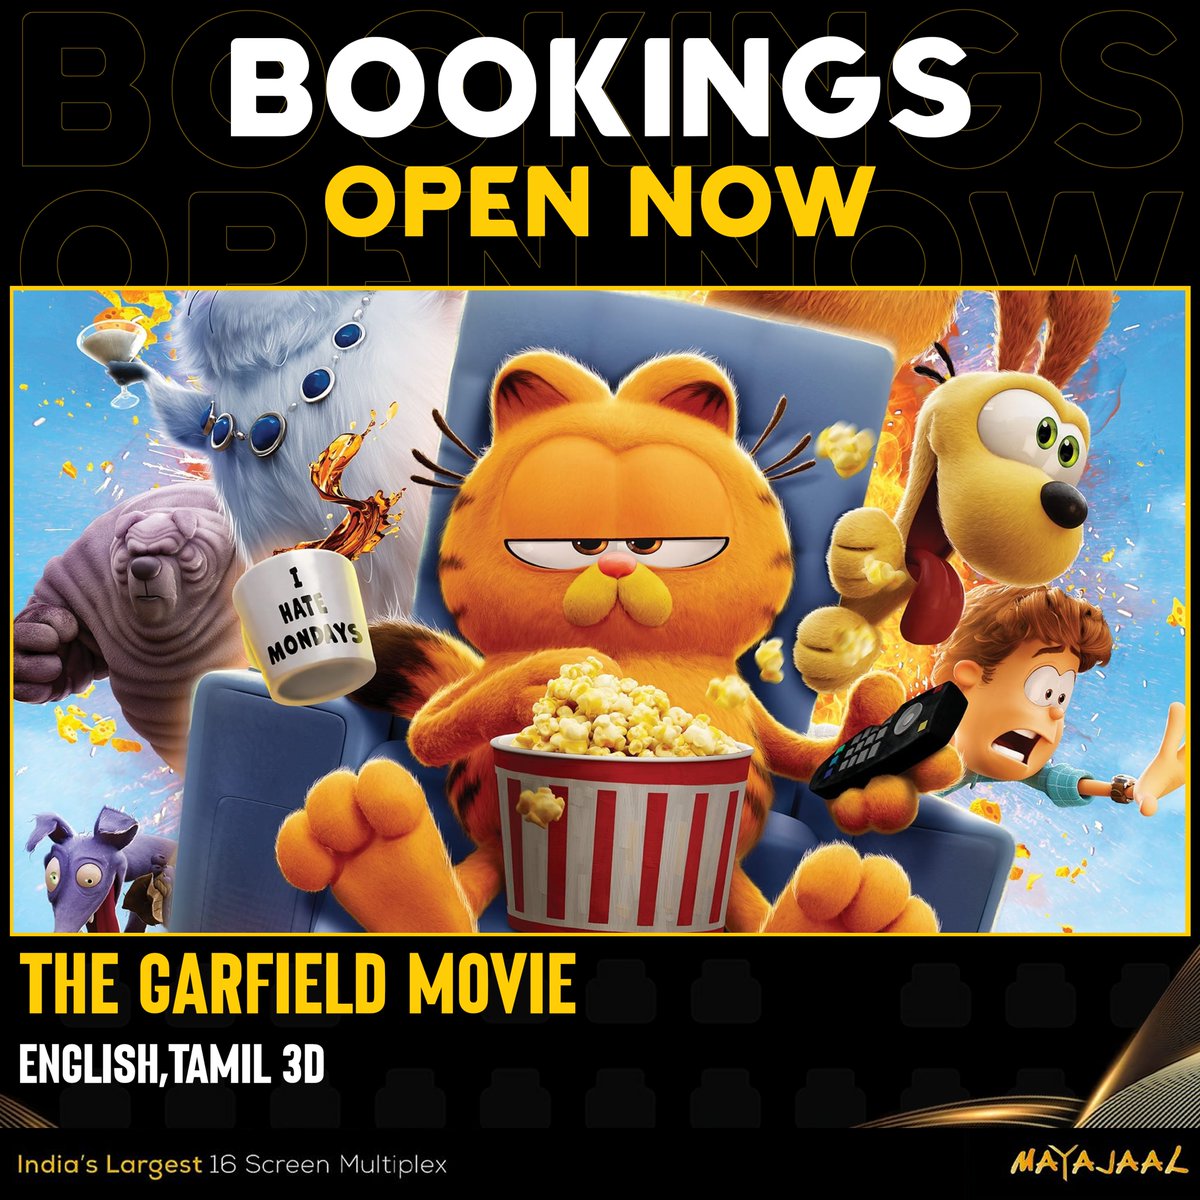 Garfield's back with a bang! Join him, Odie, and Vic on a daring heist. Bookings open for #TheGarfieldMovie (English & Tamil 3D) at #Mayajaal 🎟️bit.ly/3sVdbqD #TheGarfieldMovie